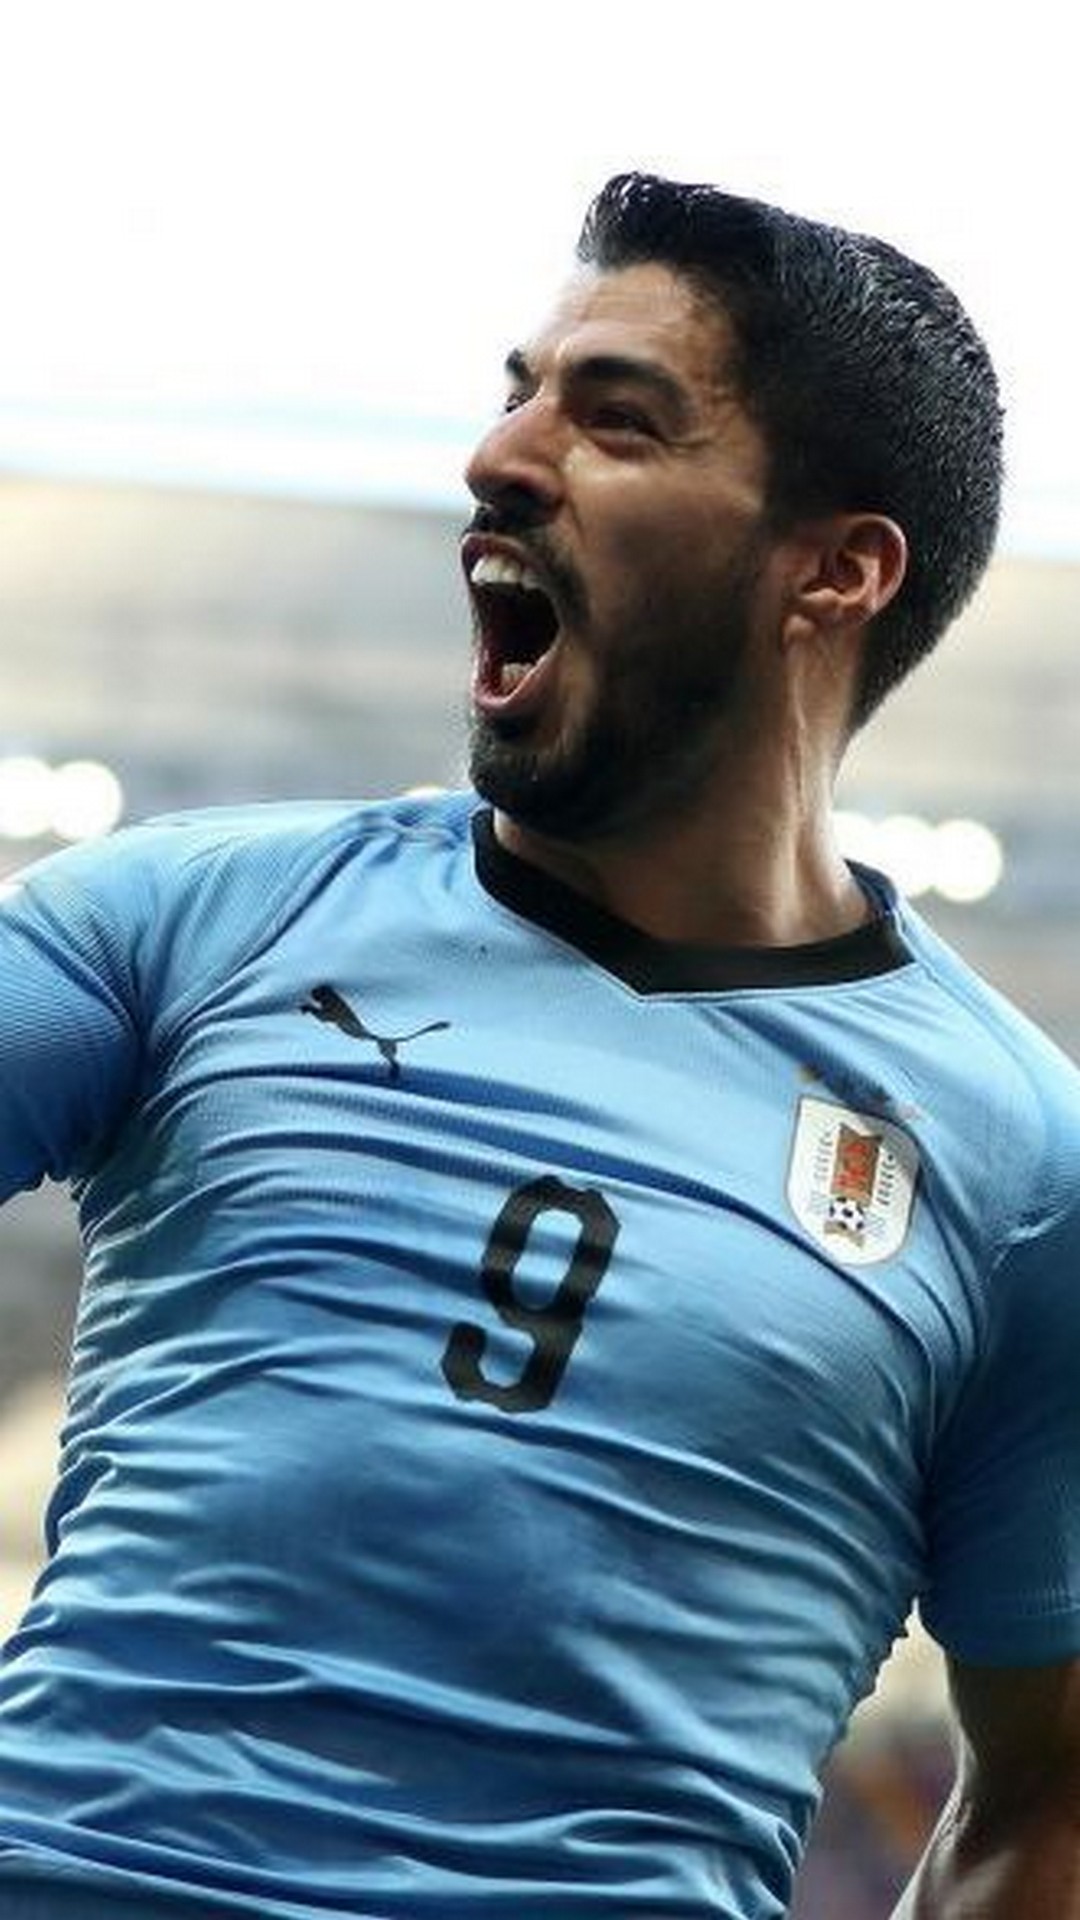 Uruguay National Team Wallpaper For iPhone with image resolution 1080x1920 pixel. You can make this wallpaper for your iPhone 5, 6, 7, 8, X backgrounds, Mobile Screensaver, or iPad Lock Screen